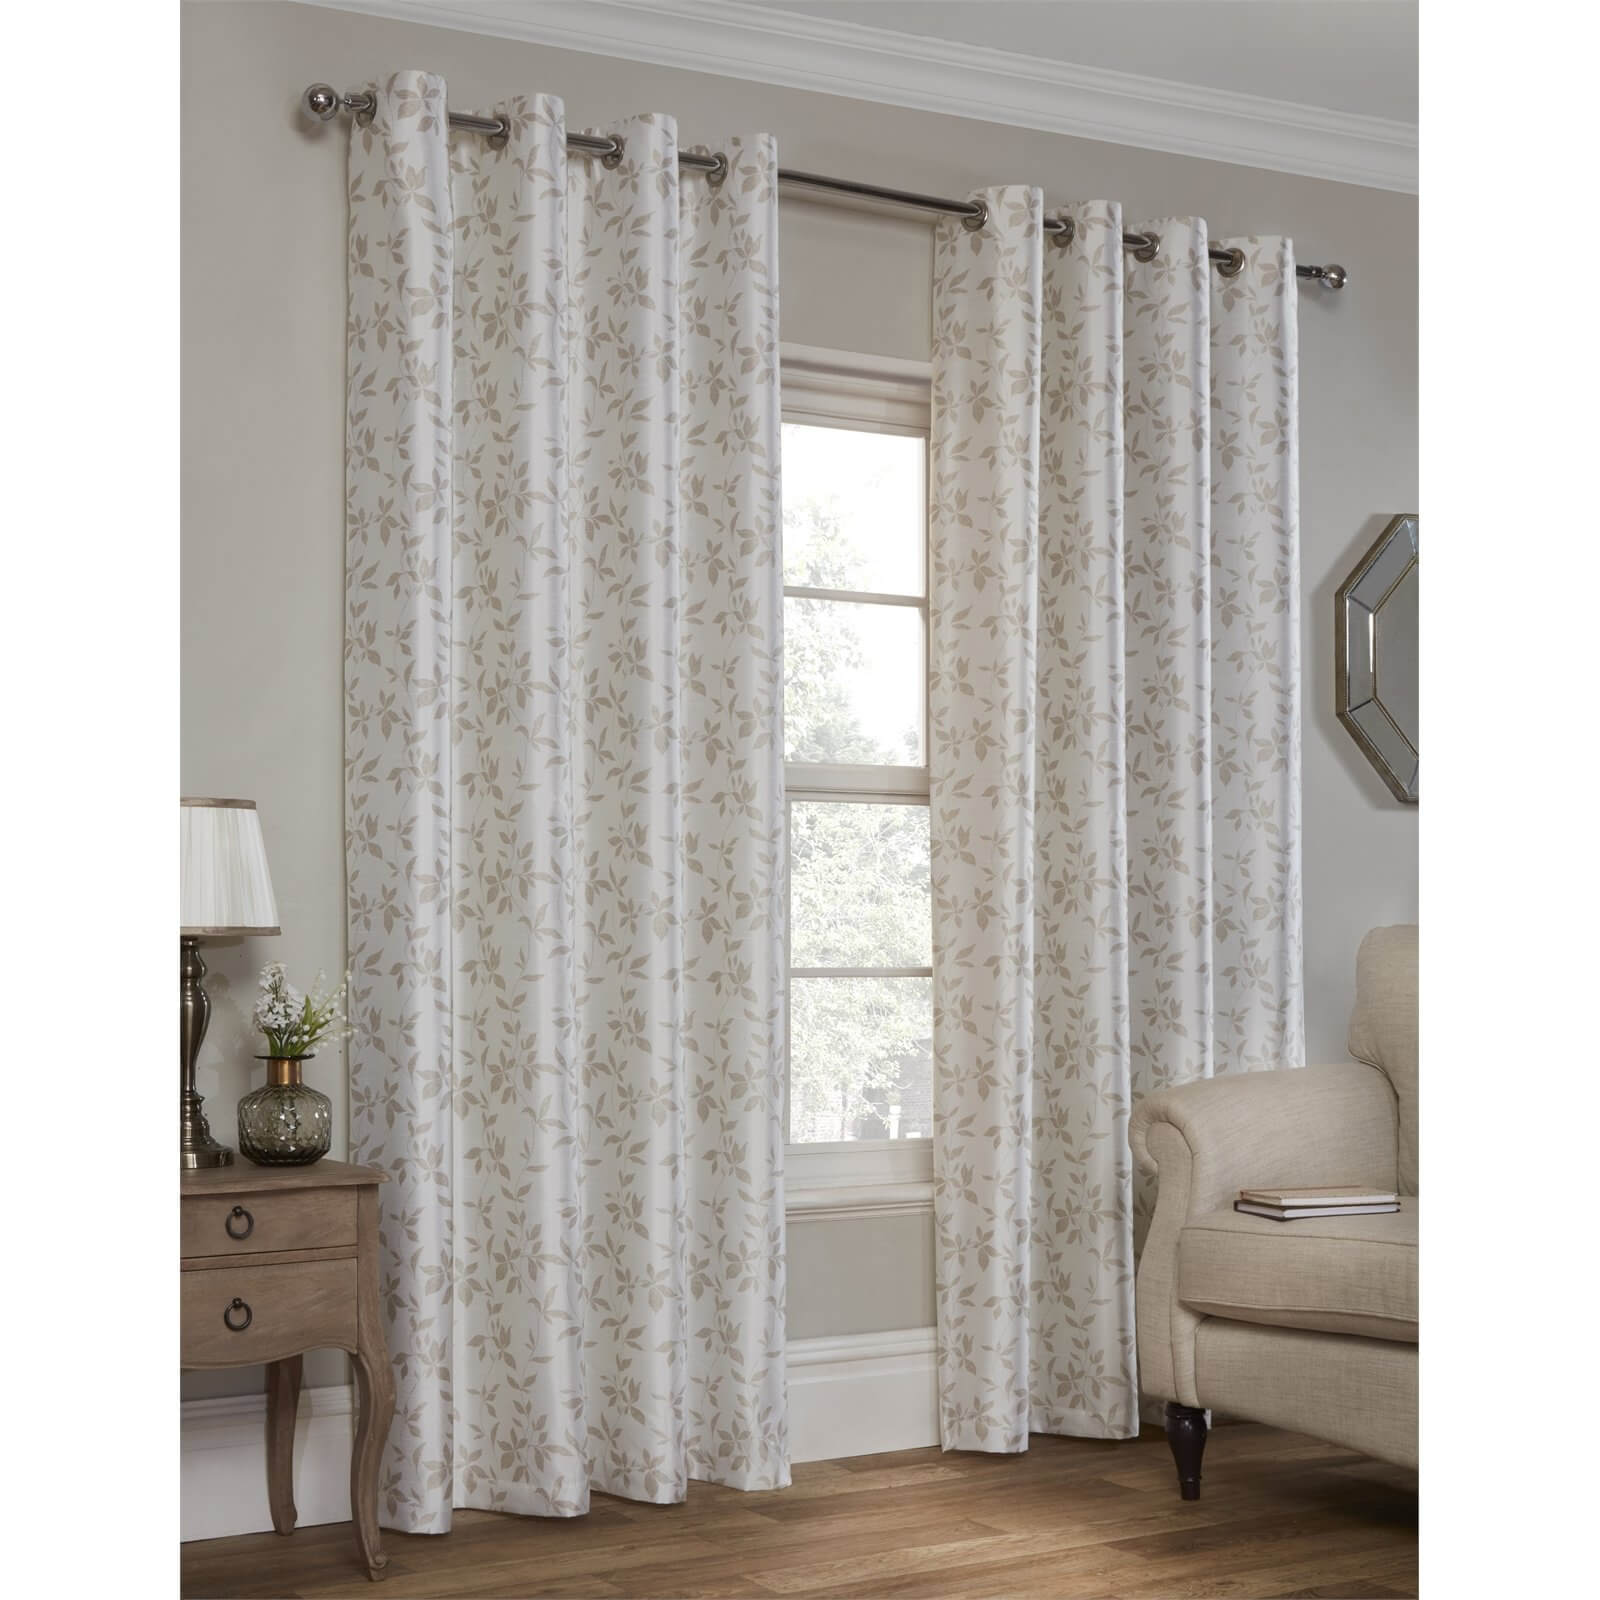 Faux Silk Leaf Natural Lined Eyelet Curtains 168cm x 229cm